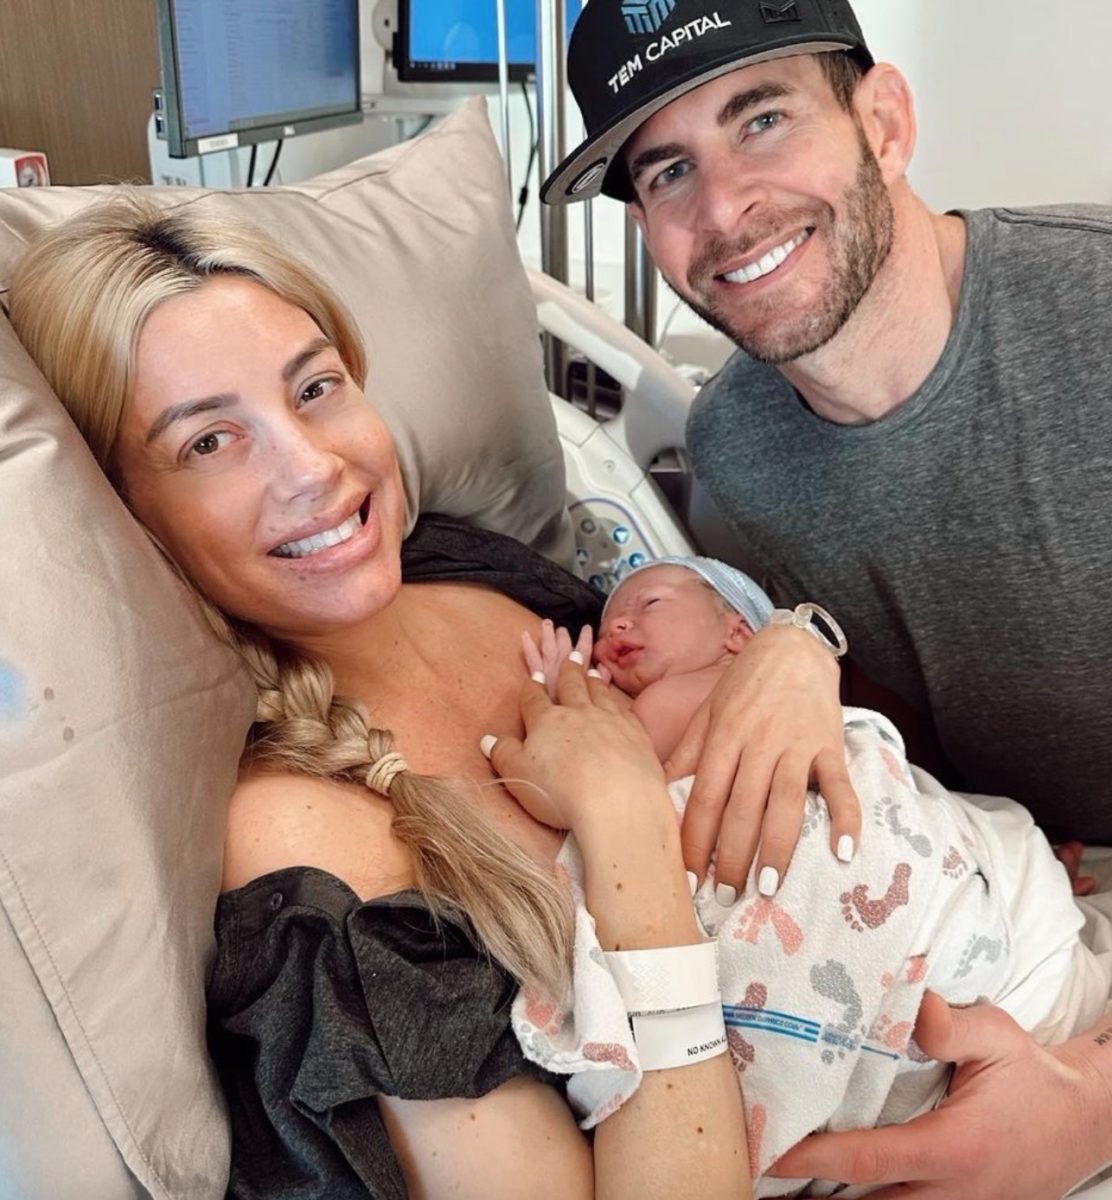 Heather El Moussa Slammed After She Offers Her Followers a 'Mom-Tip' | People are slamming celebrity real estate agent Heather El Moussa after she celebrated taking her 3-month-old son on his first flight.